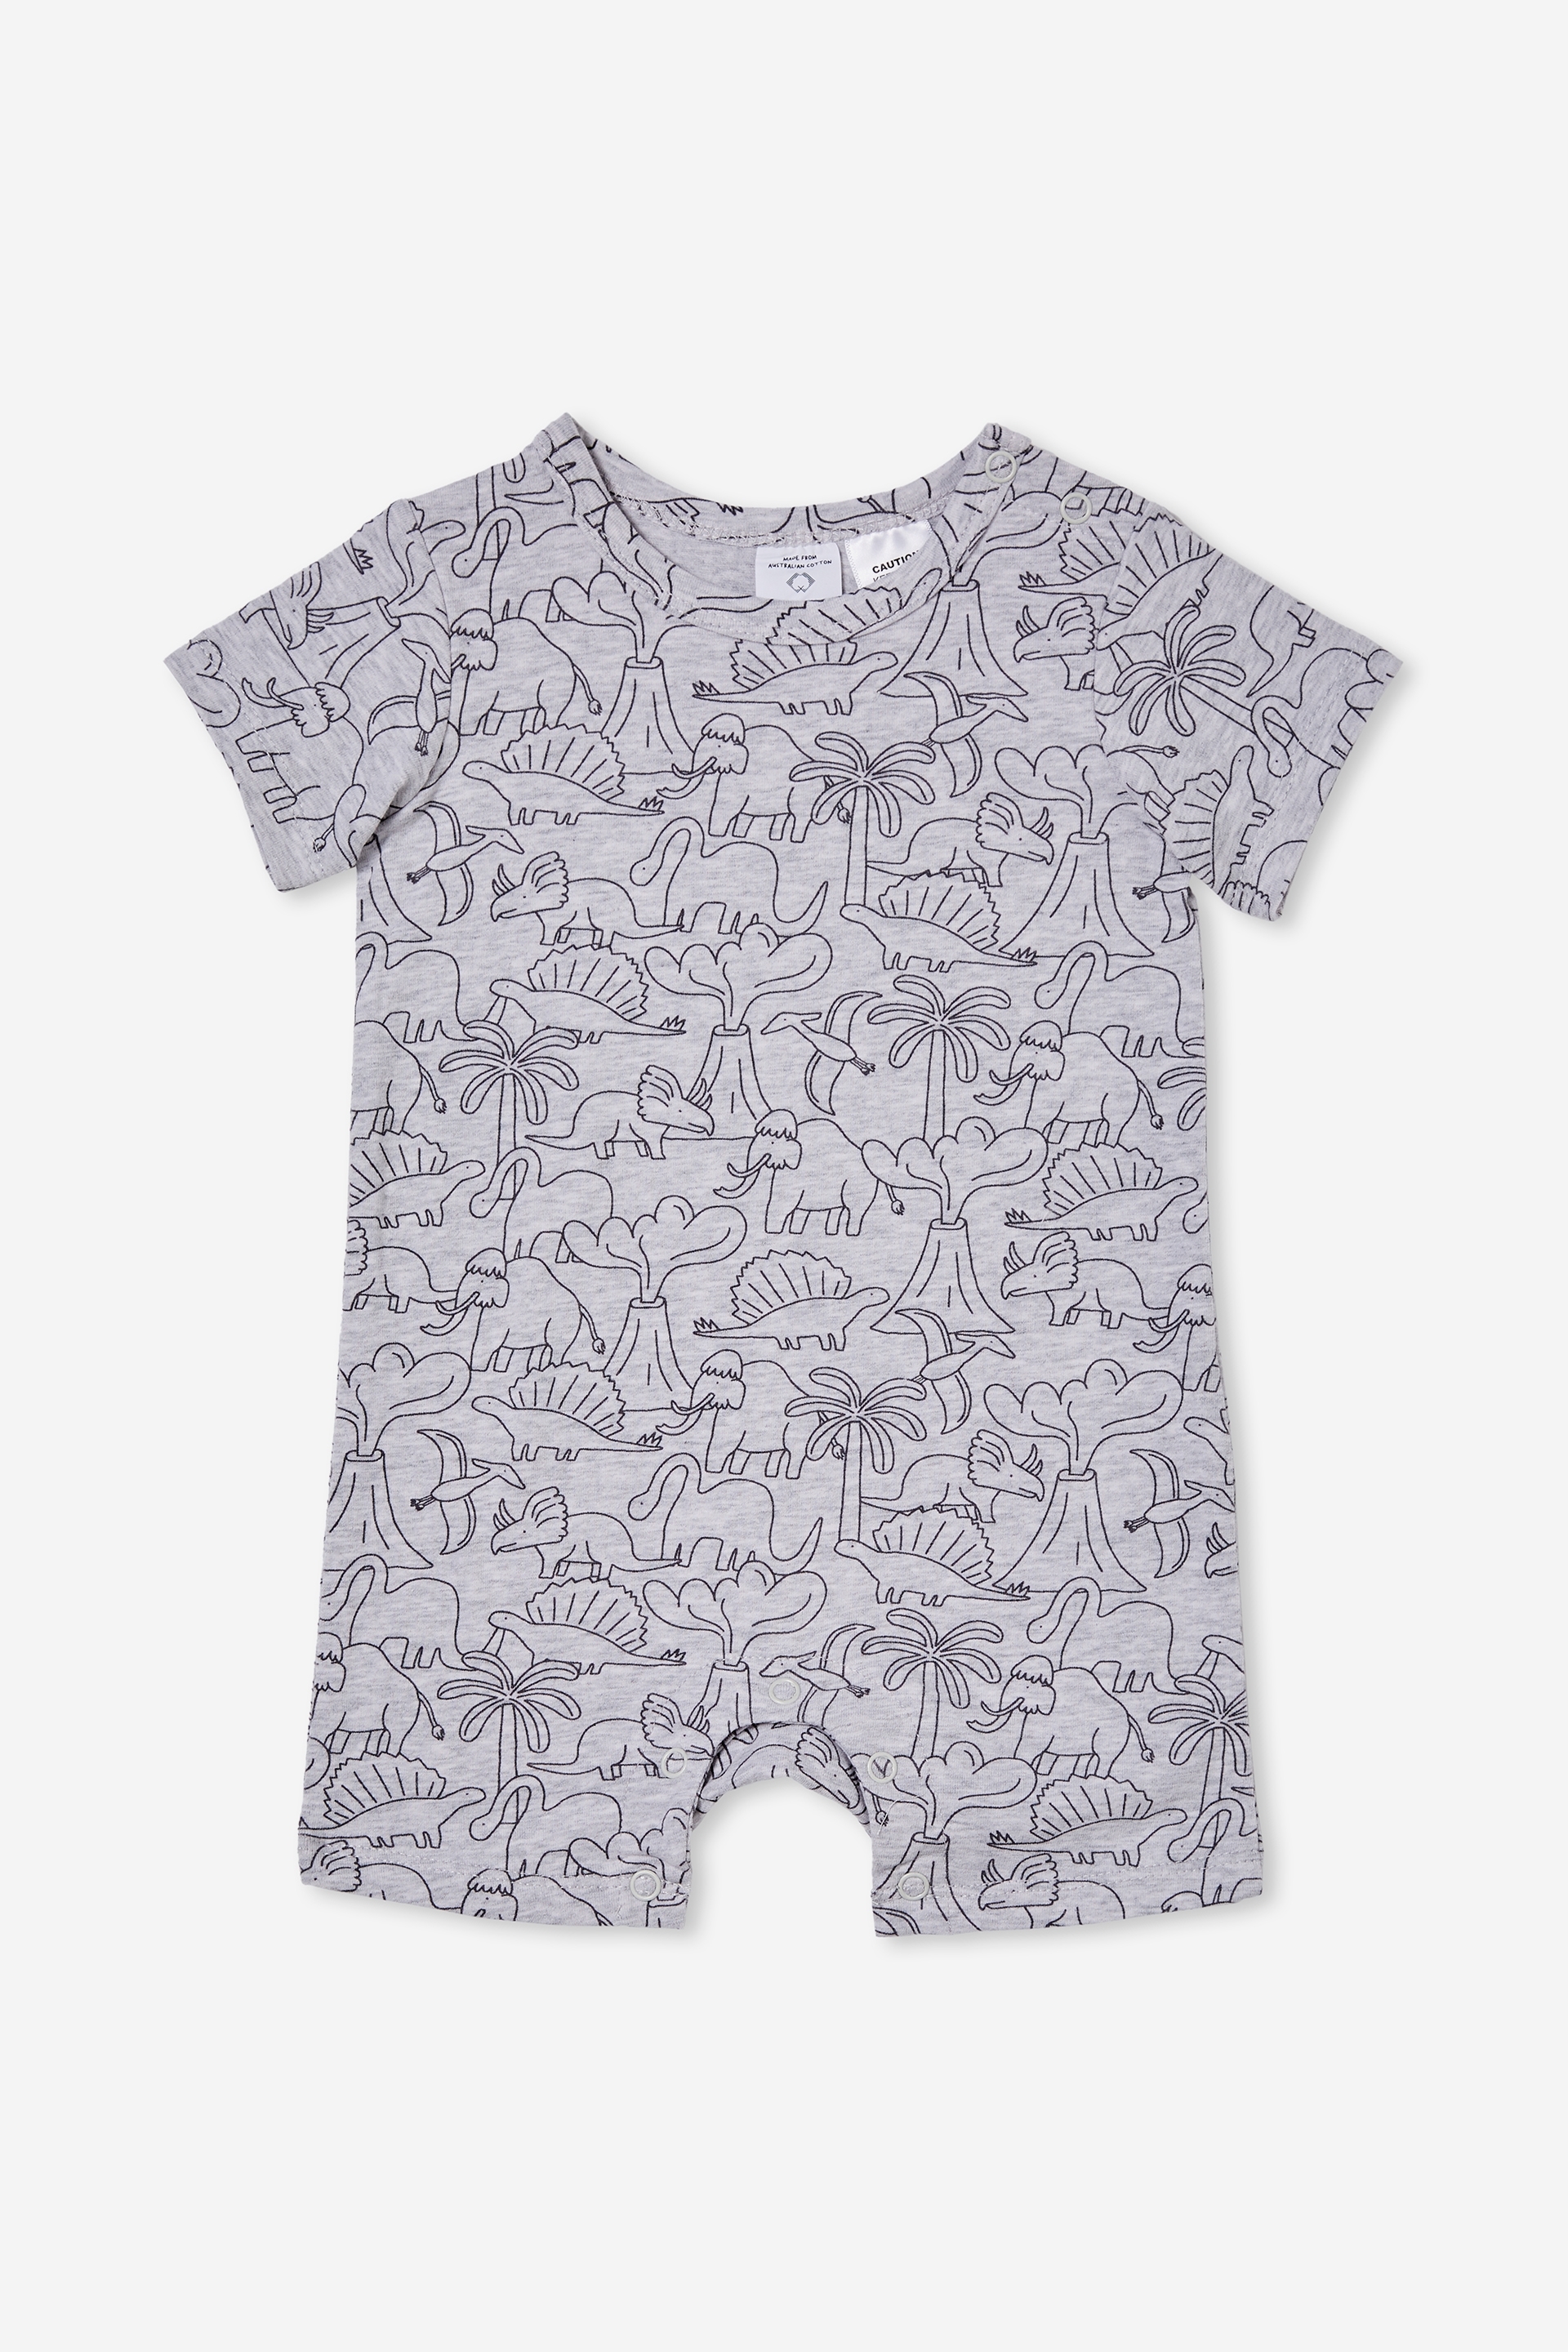 Cotton On Kids - The Short Sleeve Romper - Cloud marle/dino land